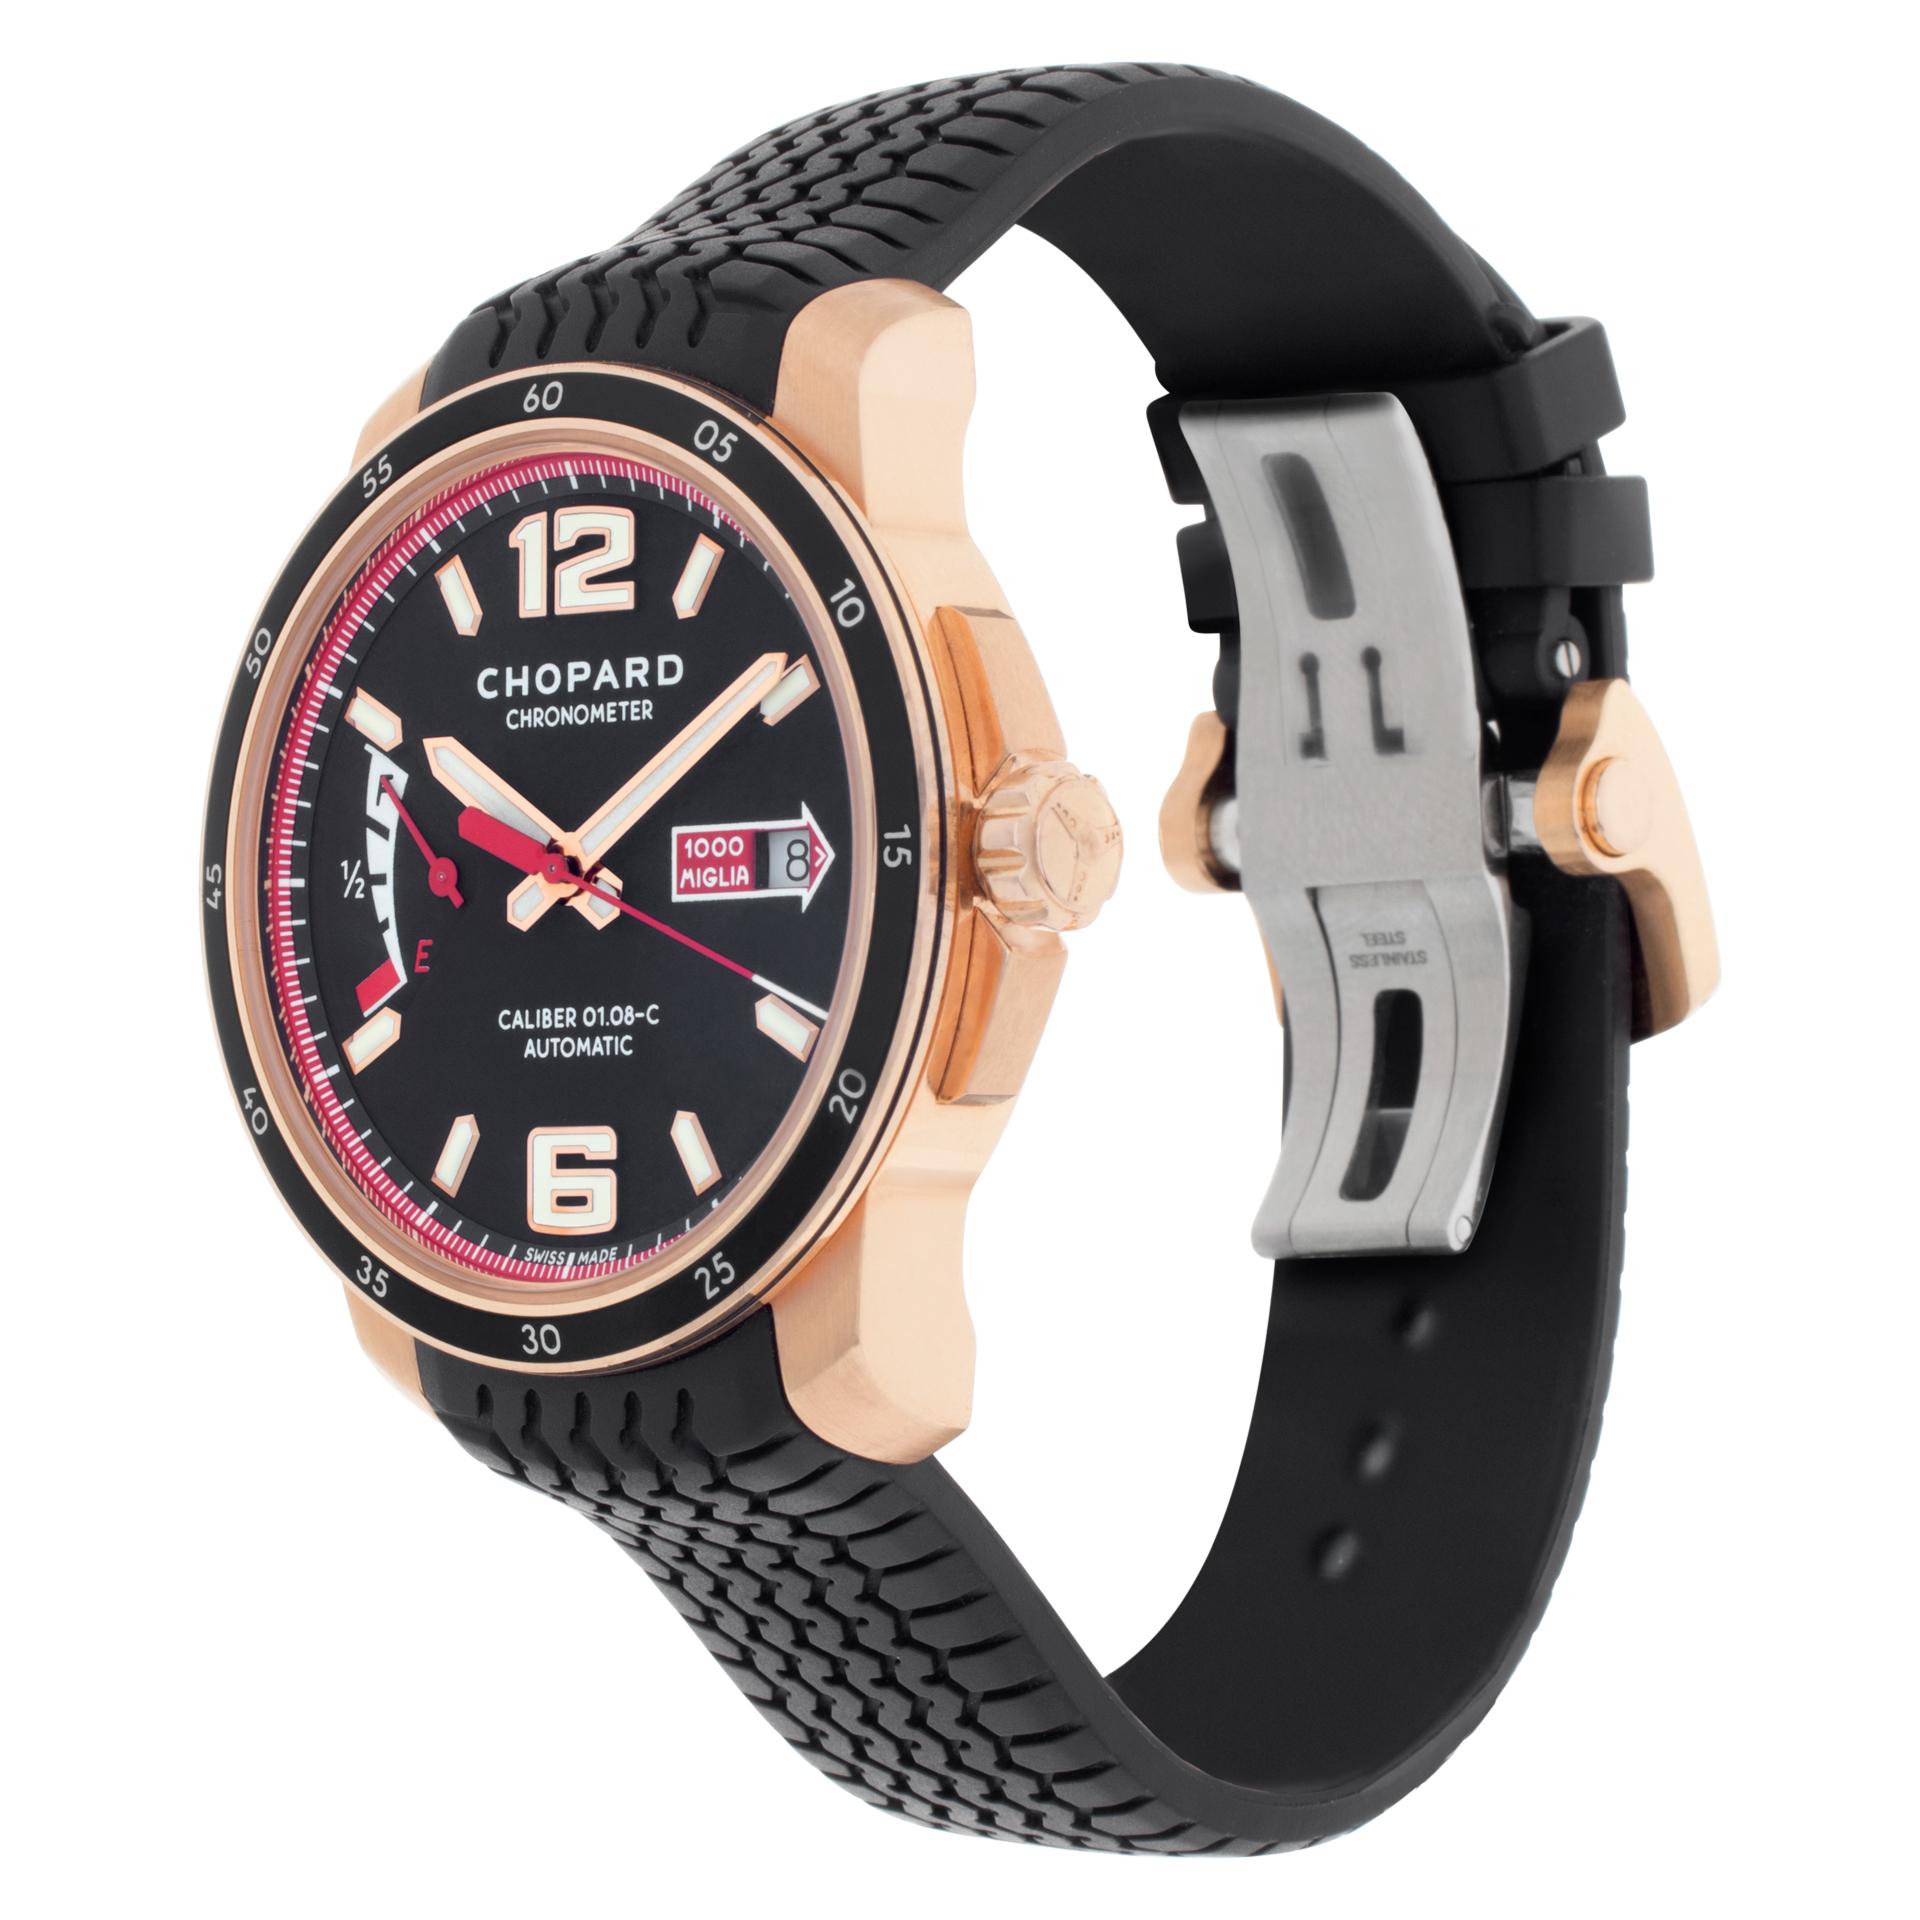 Chopard Mille Miglia GTS Power Control 'Brescia Roma' in 18k rose gold on a rubber strap with Chopard 18k rose gold & stainless steel deployant buckle. Auto movement under glass w/ sweep seconds, date and power reserve. 43 mm case size. Ref 161296.